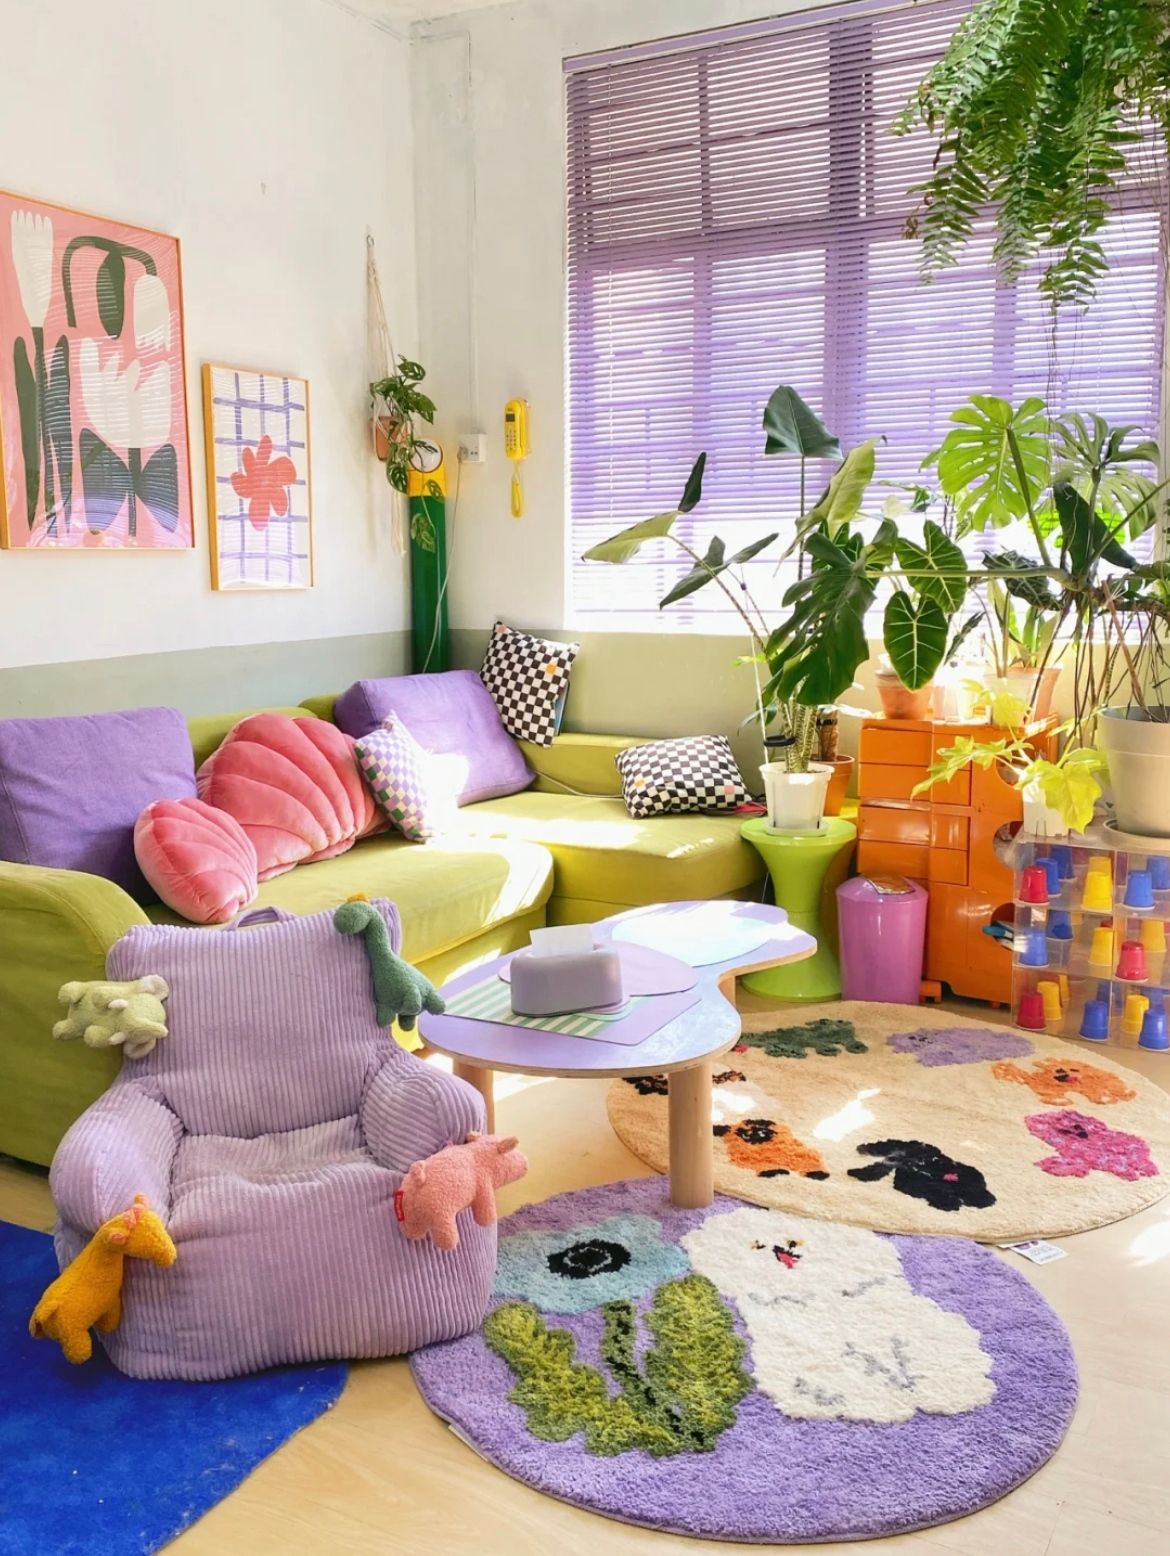 Cheerful Atmosphere with Green and Purple Accents